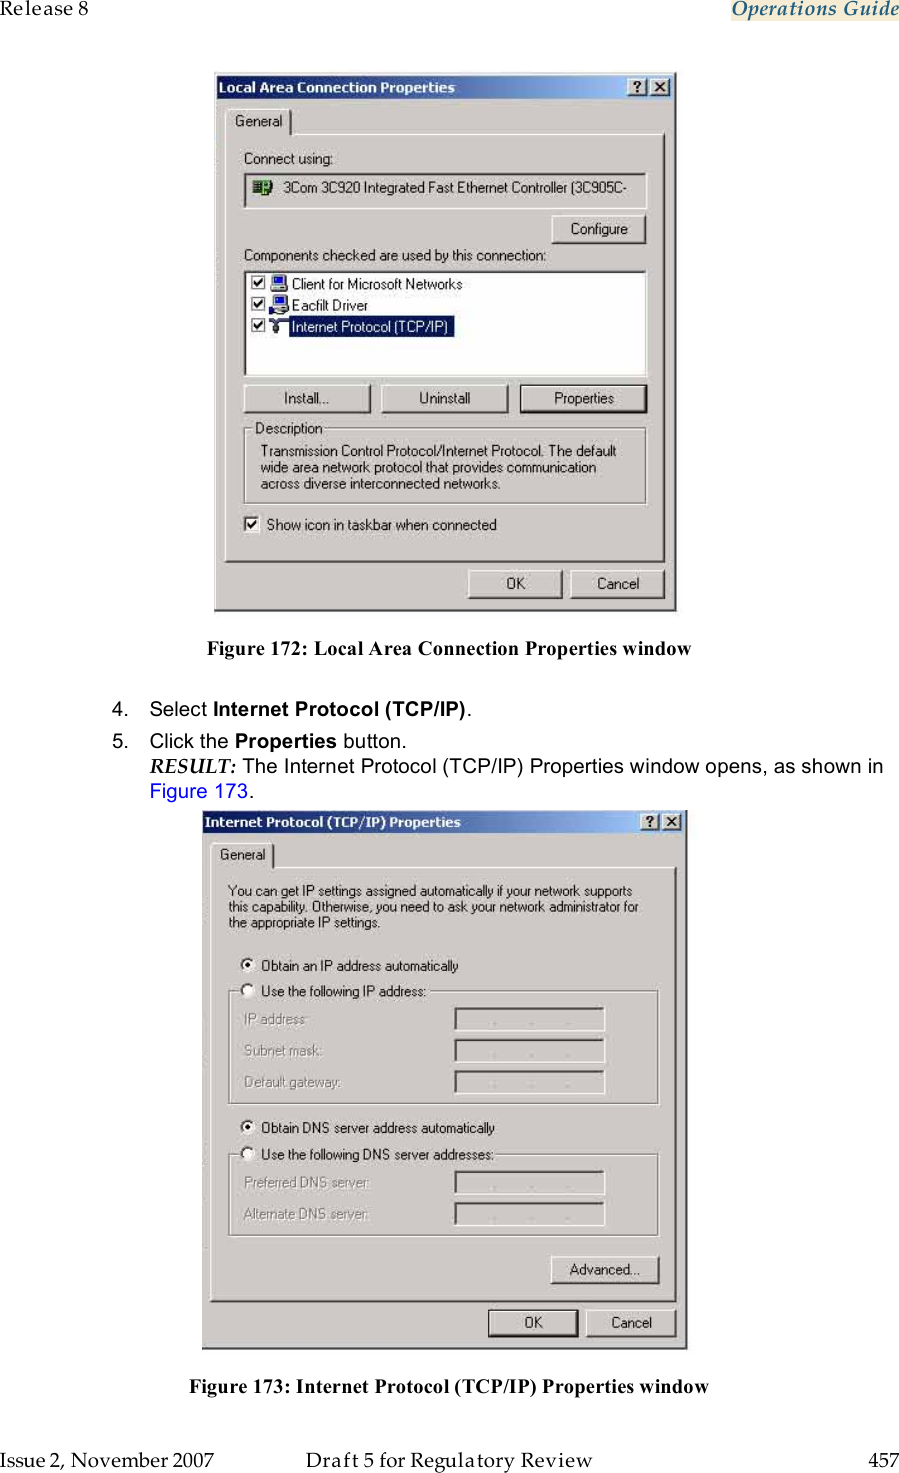 Release 8    Operations Guide   Issue 2, November 2007  Draft 5 for Regulatory Review  457      Figure 172: Local Area Connection Properties window  4.  Select Internet Protocol (TCP/IP).  5.  Click the Properties button. RESULT: The Internet Protocol (TCP/IP) Properties window opens, as shown in Figure 173.  Figure 173: Internet Protocol (TCP/IP) Properties window 